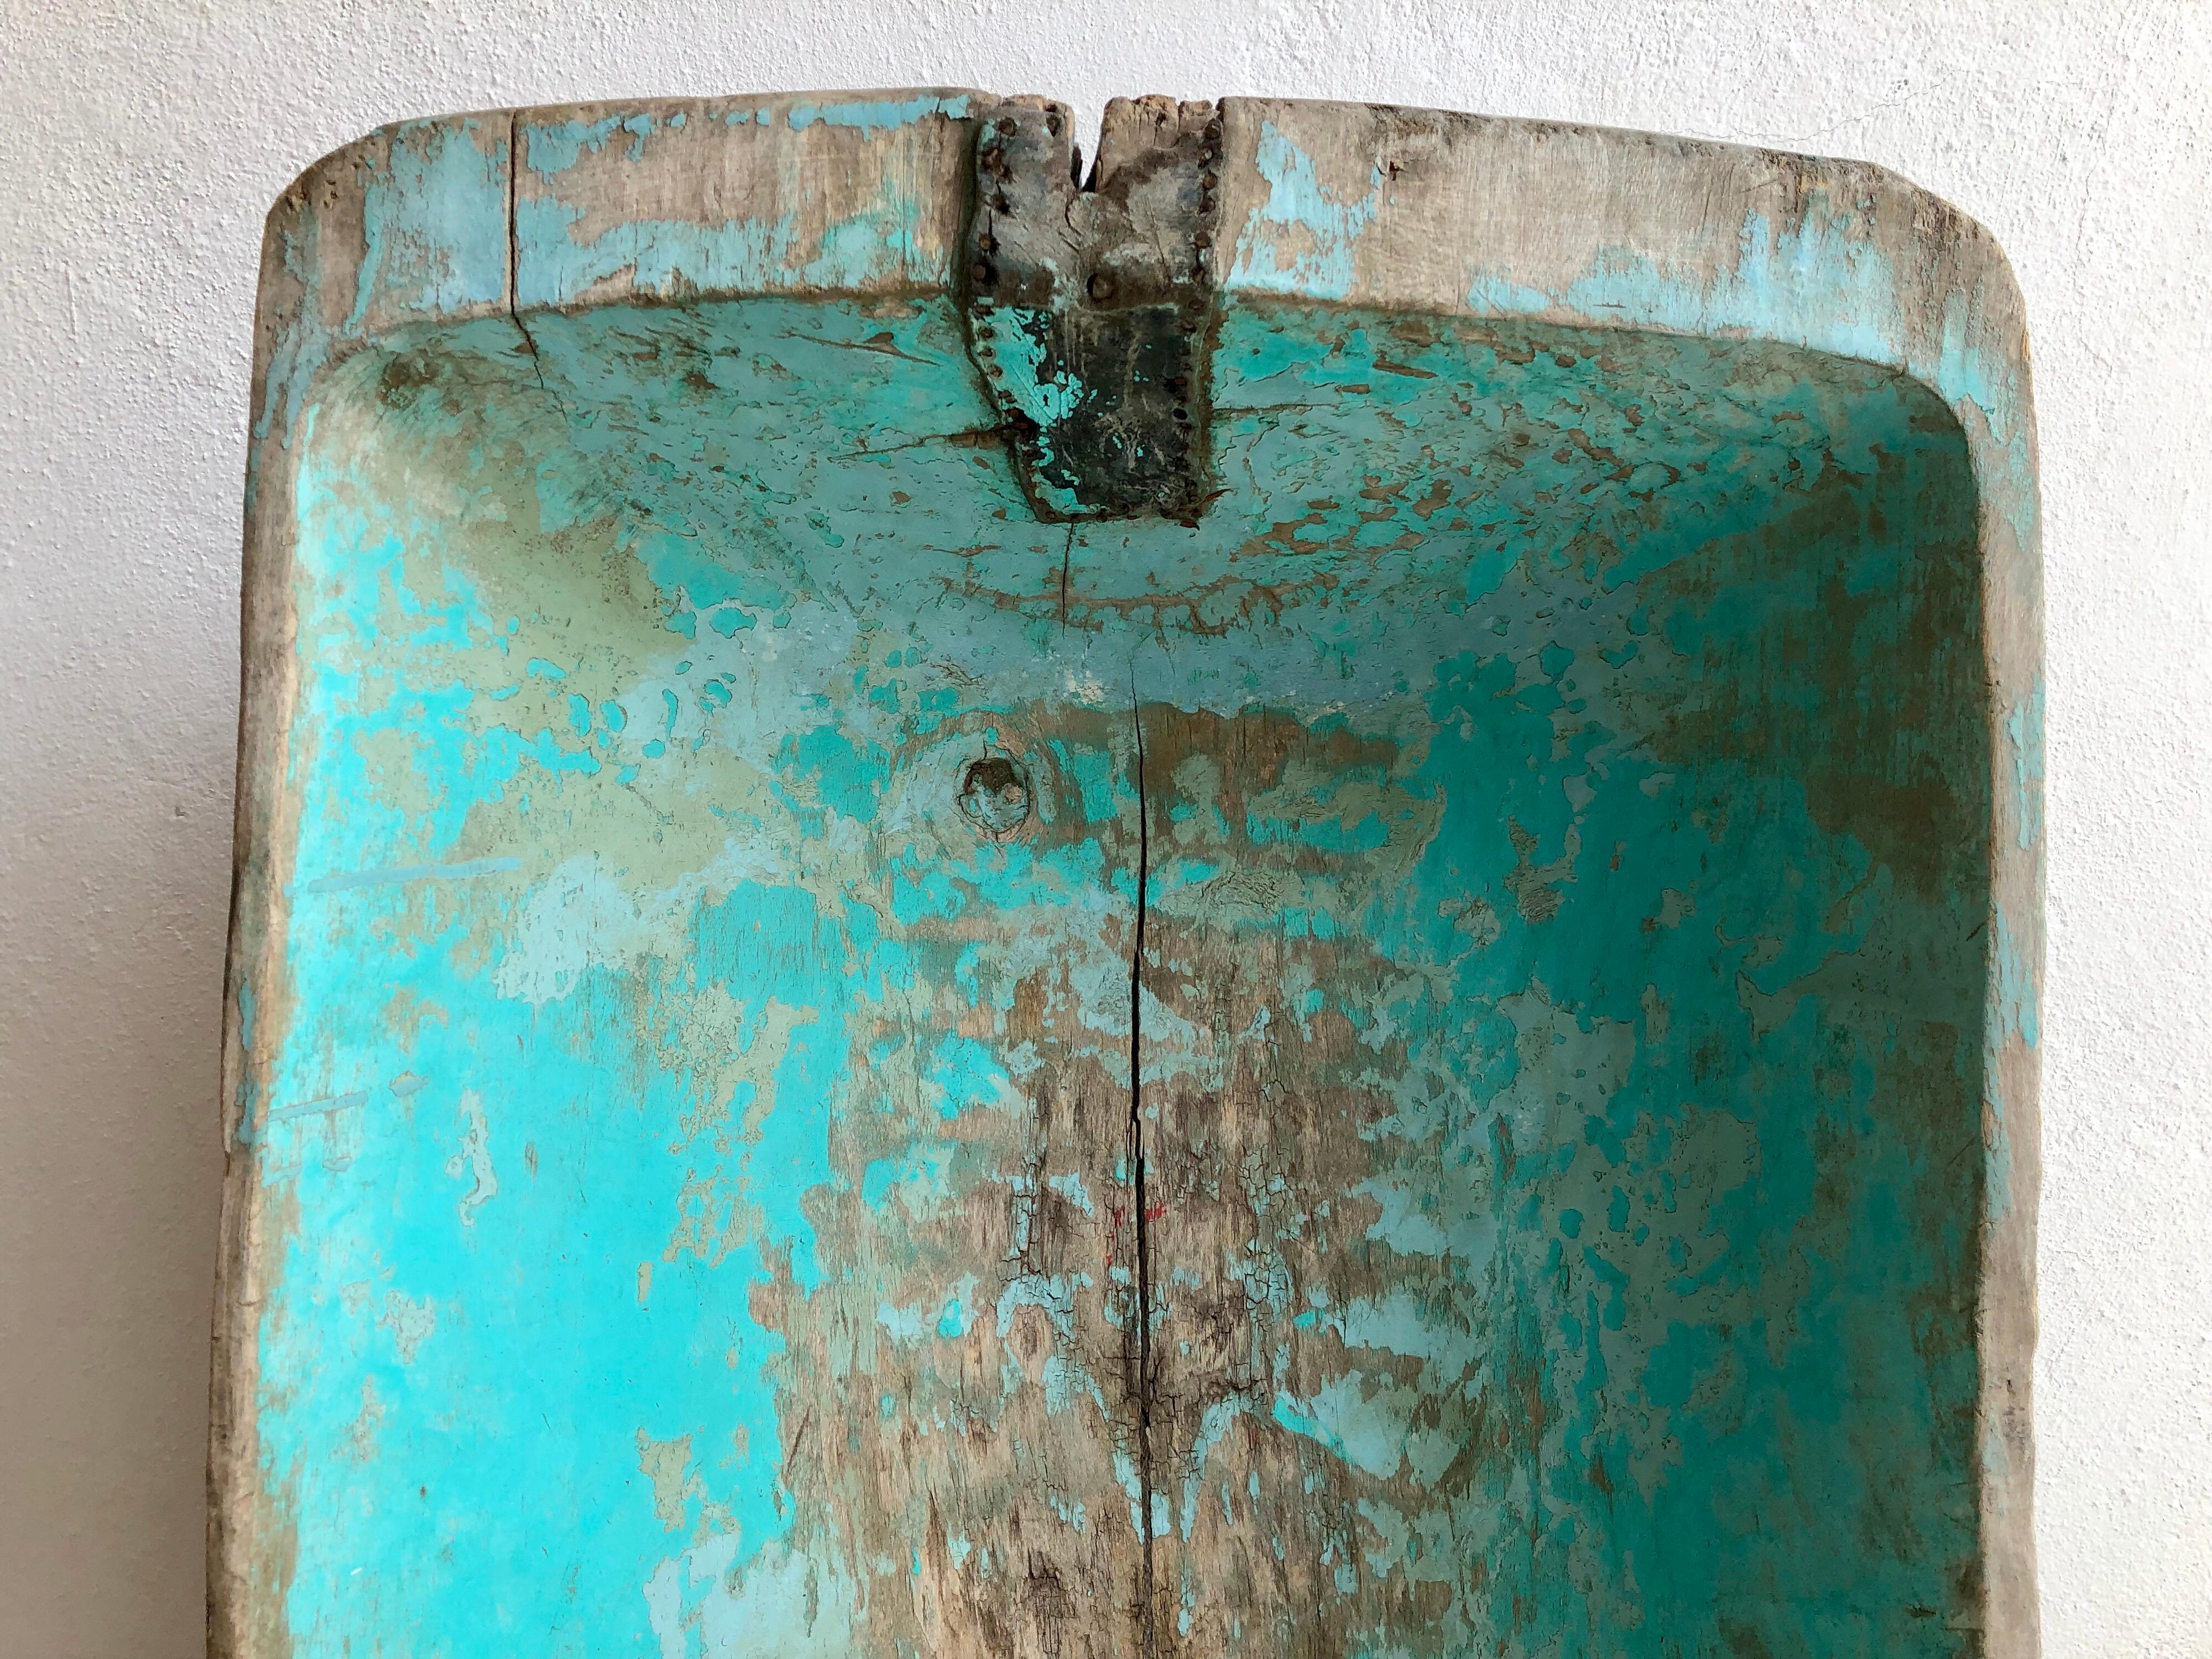 Turquoise painted, cypress wood wash basin trough from Central Mexico. Its washboard ridges are still apparent. Original leather patchwork to strengthen the piece. Original turquoise green paint.